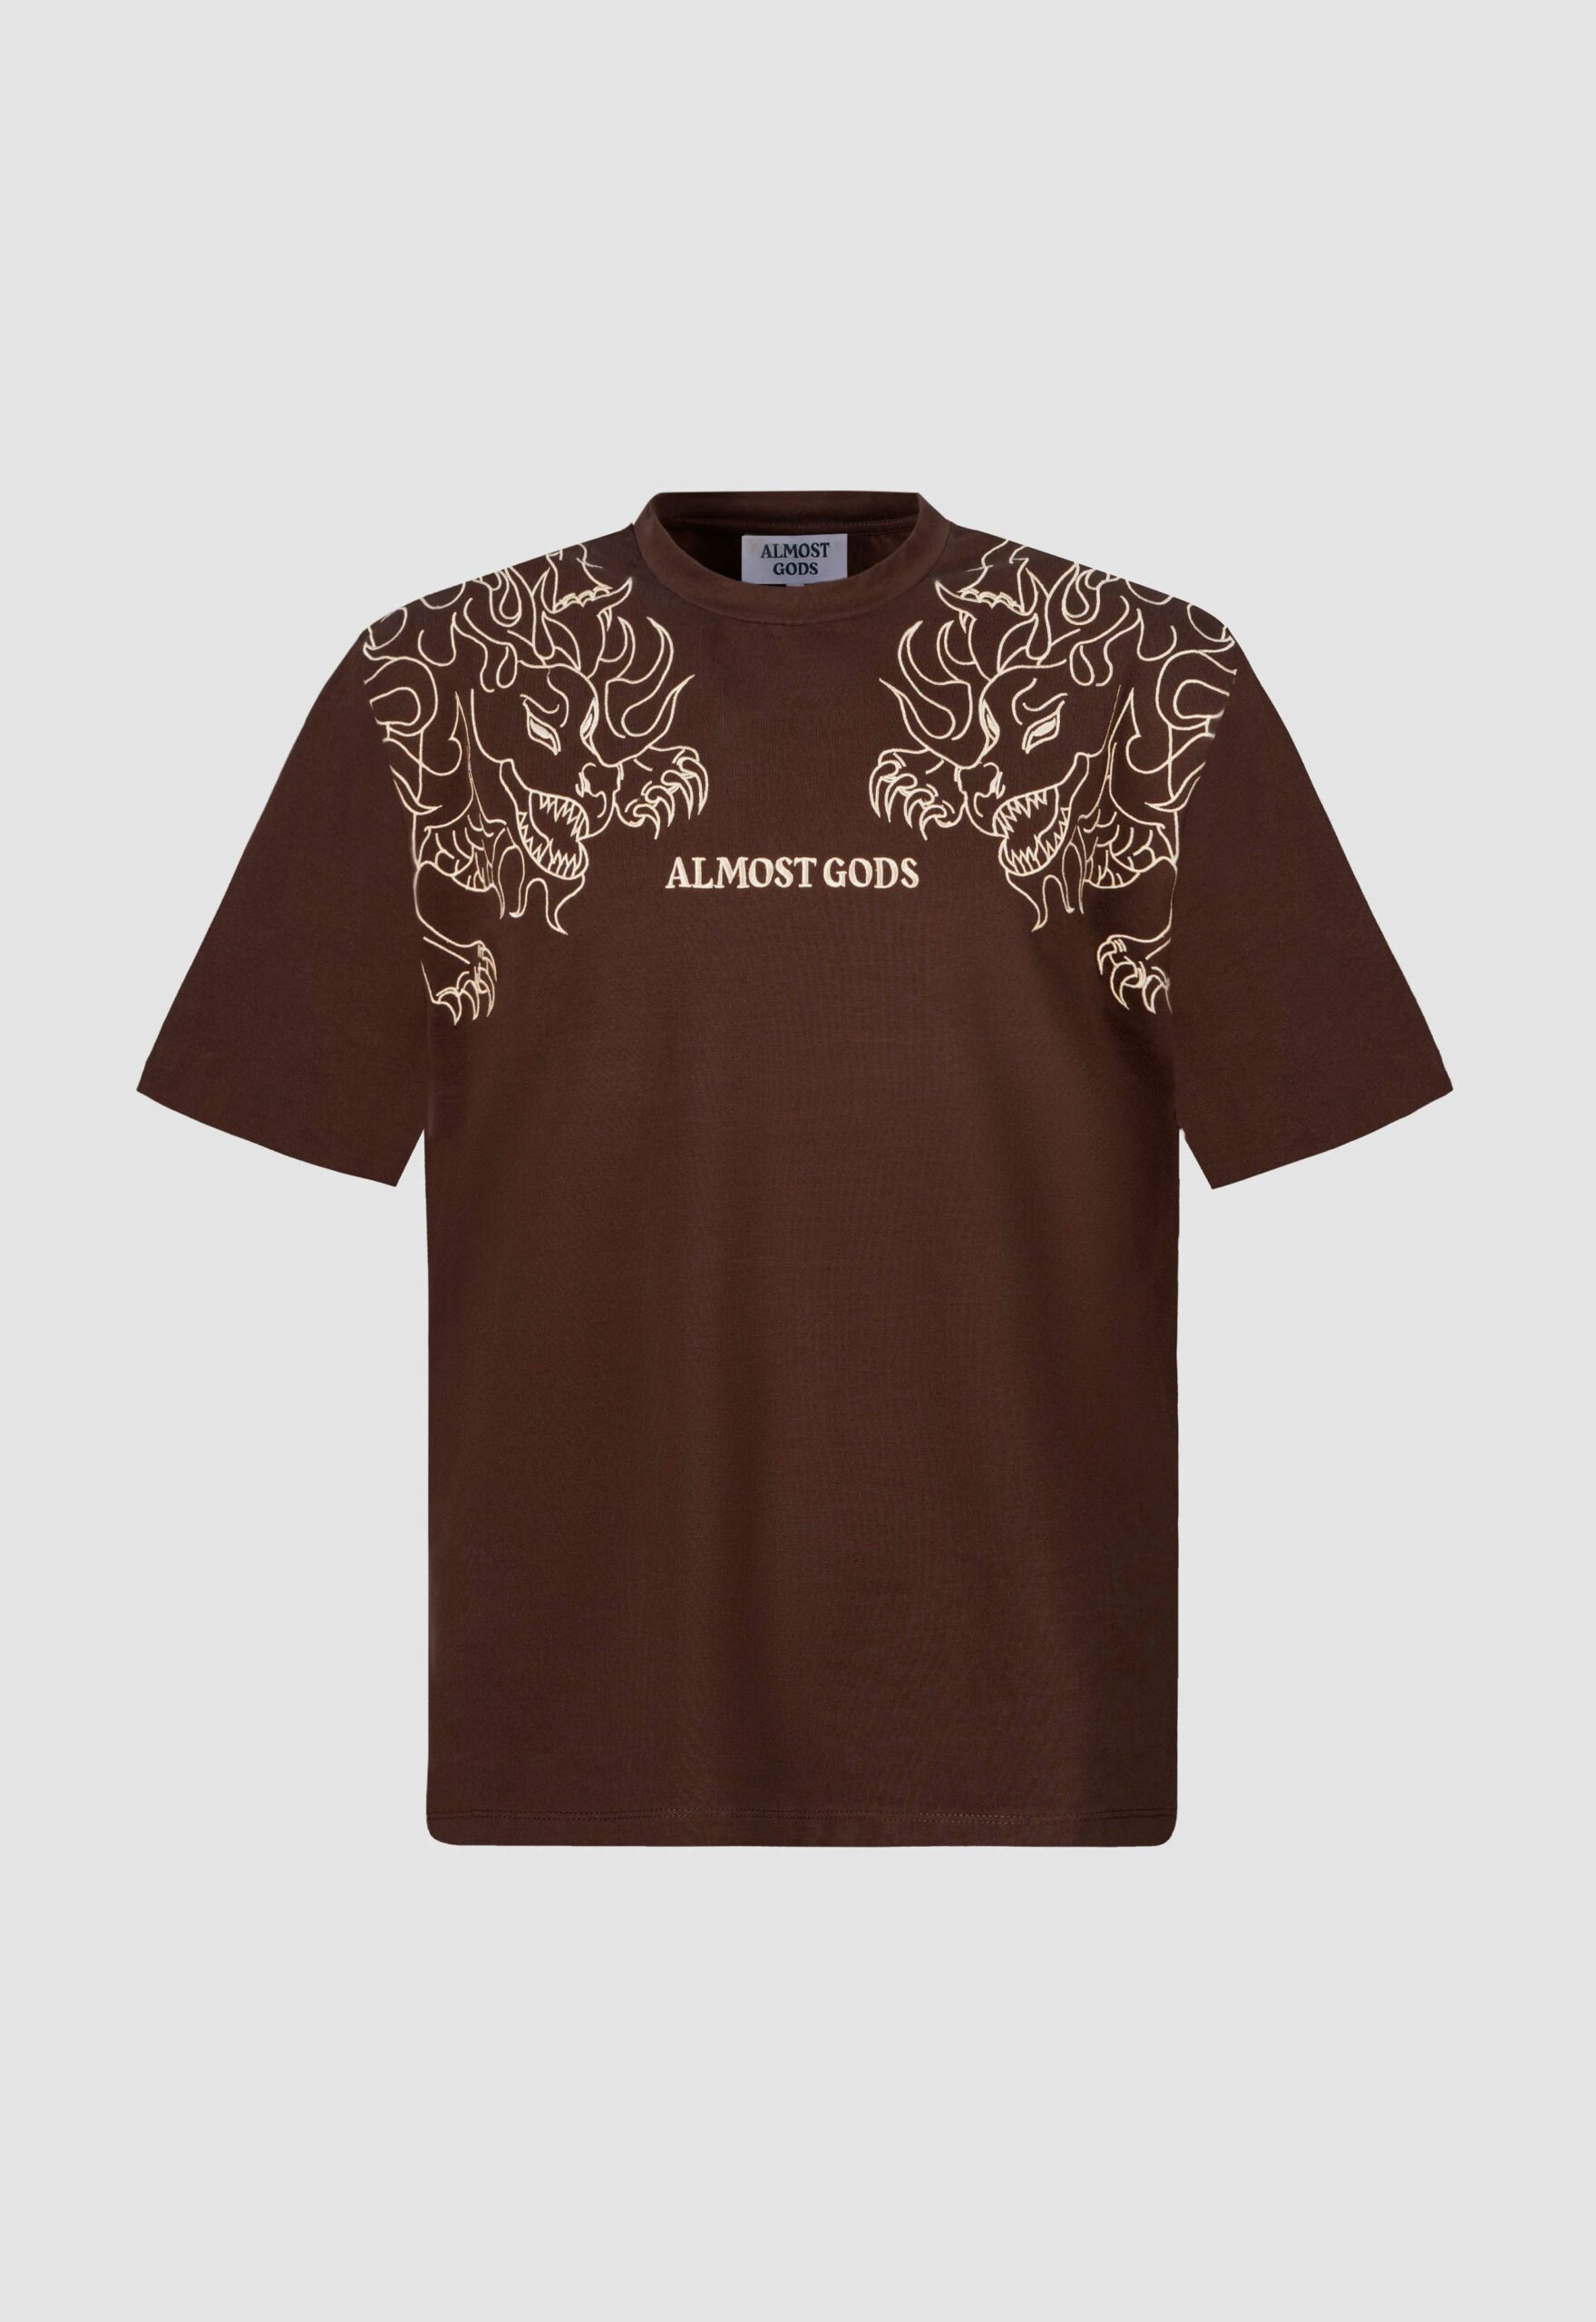 LEVIATHAN EMBROIDERED TEE IN BROWN - almostgods.com